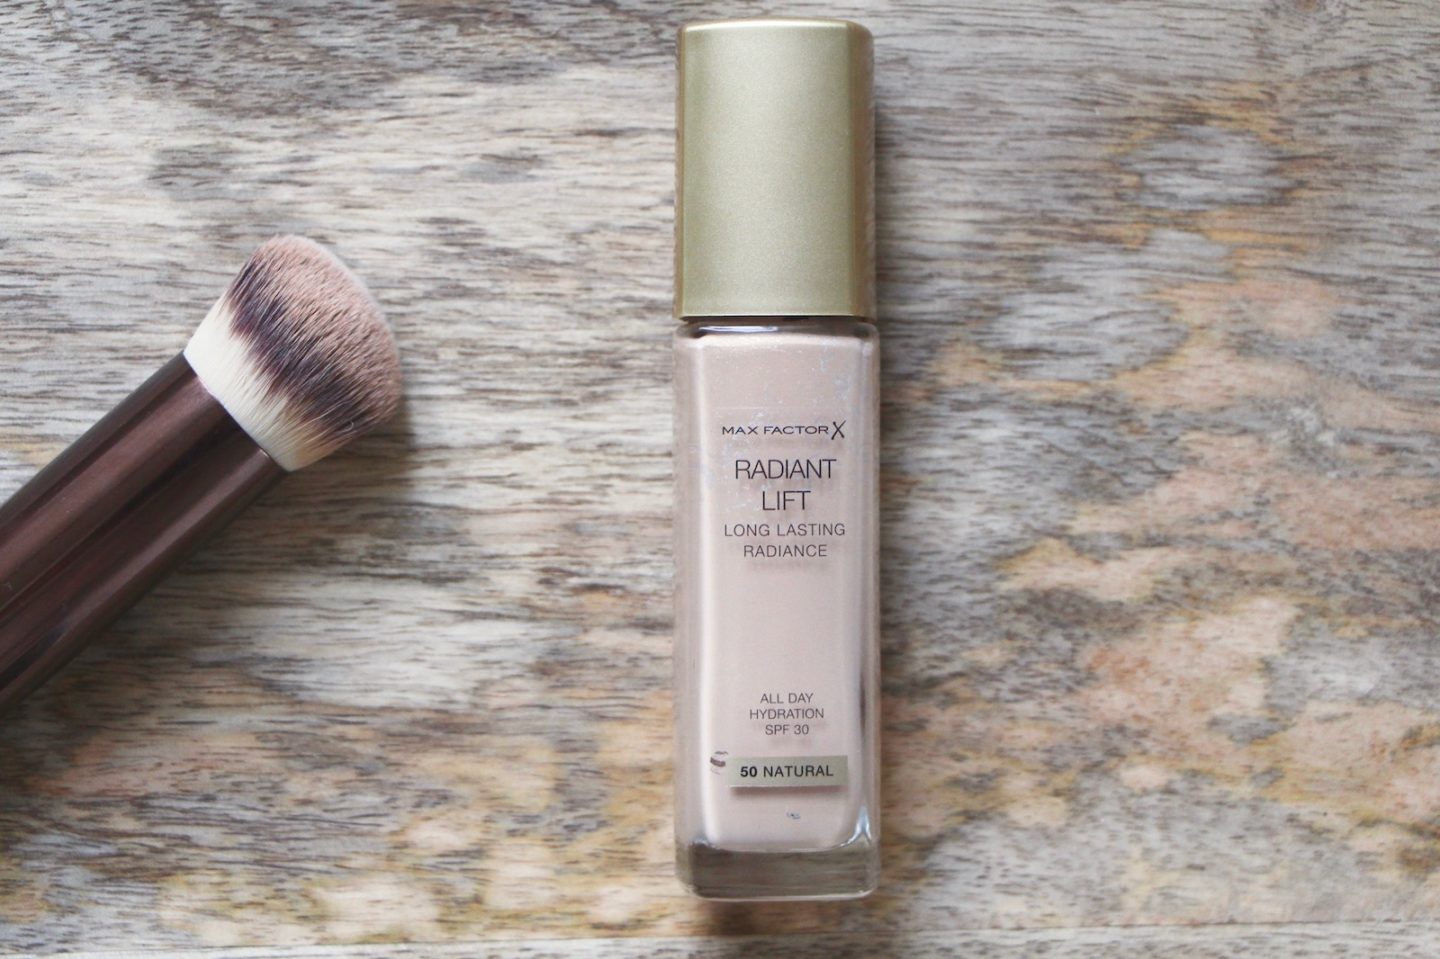 Max Factor Radiant Lift foundation review